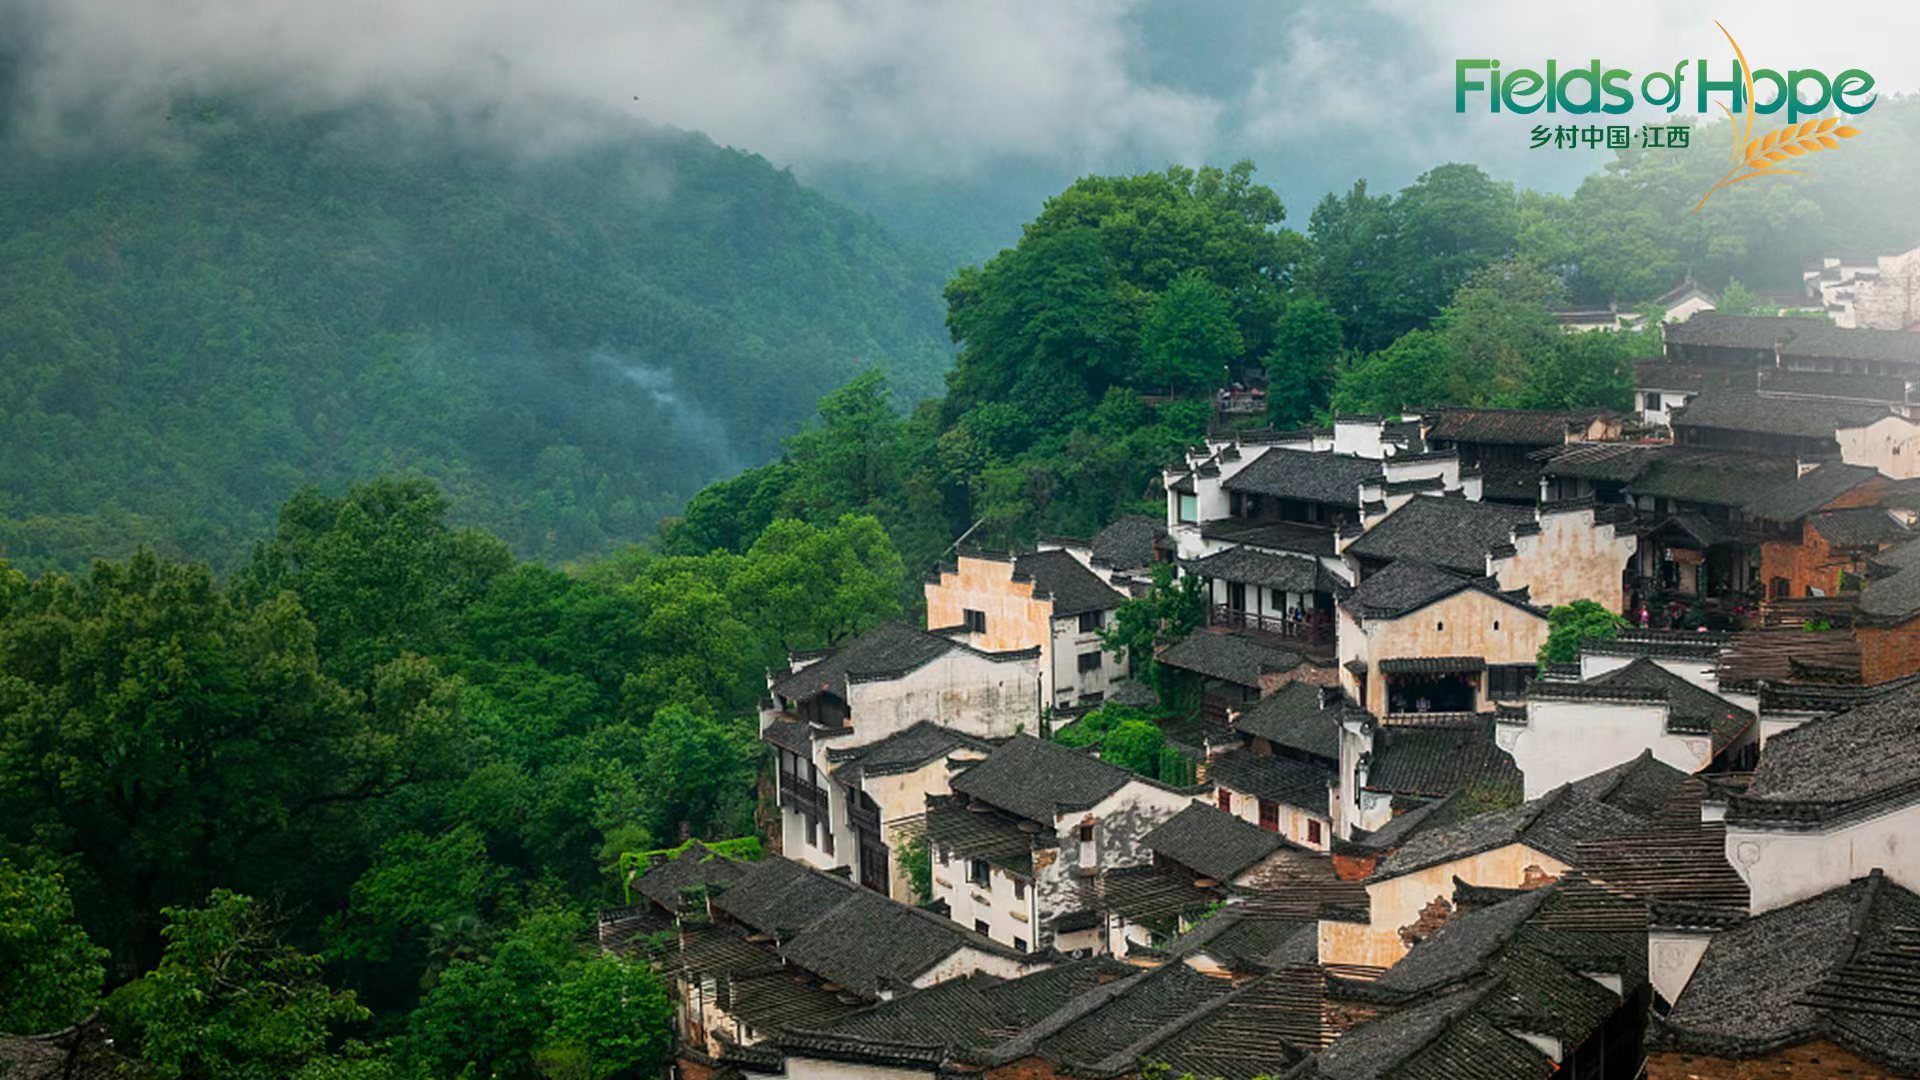 Live: A glimpse of Huangling Village, a pearl enveloped by lush mountains – Ep. 2